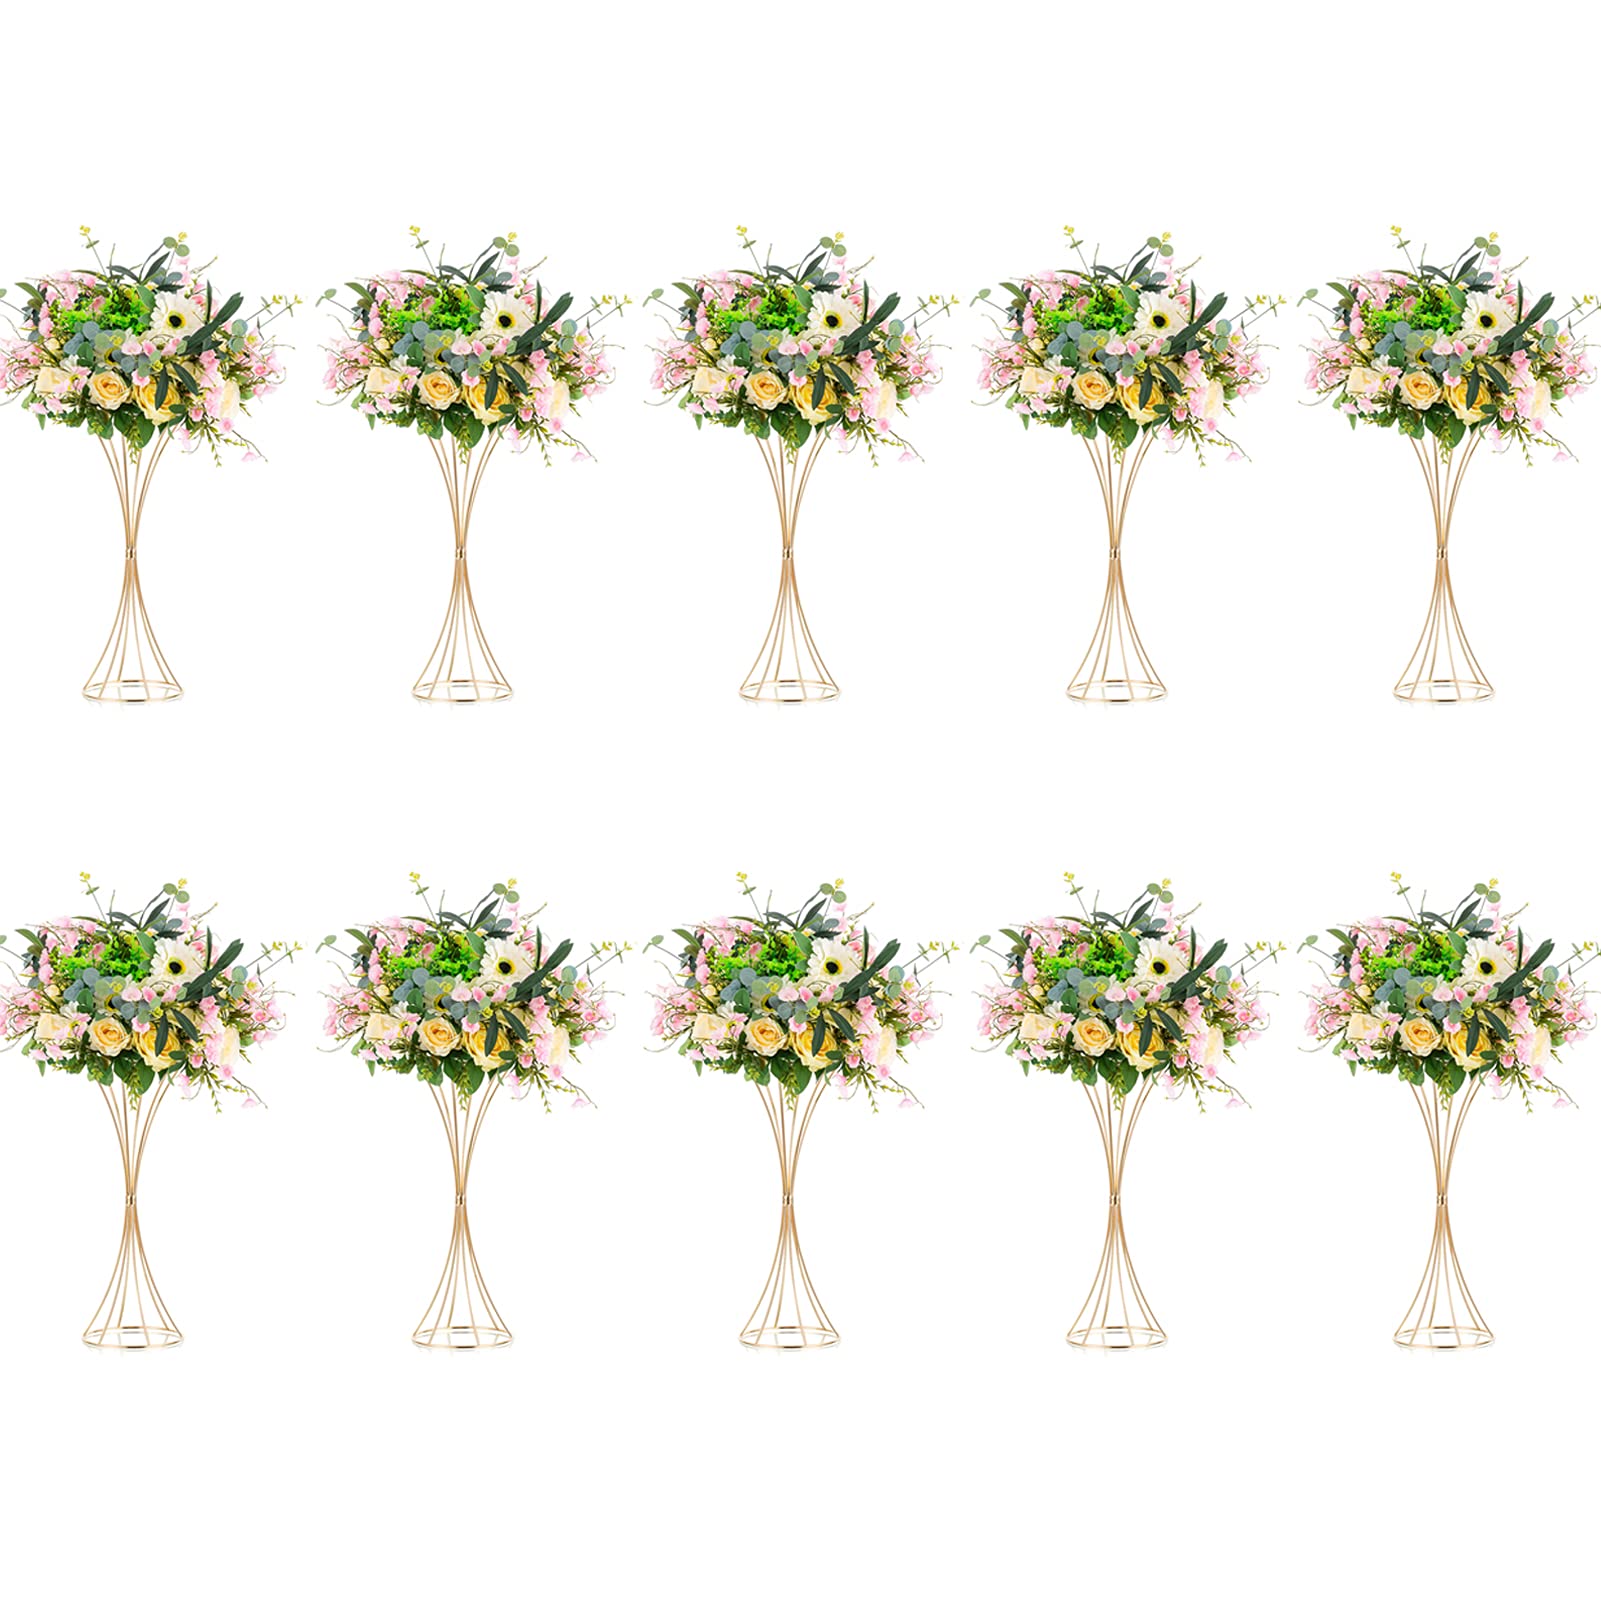 Metal Flower Stand Frames Gold Centerpieces For Wedding Event Table Decor - KetieStory